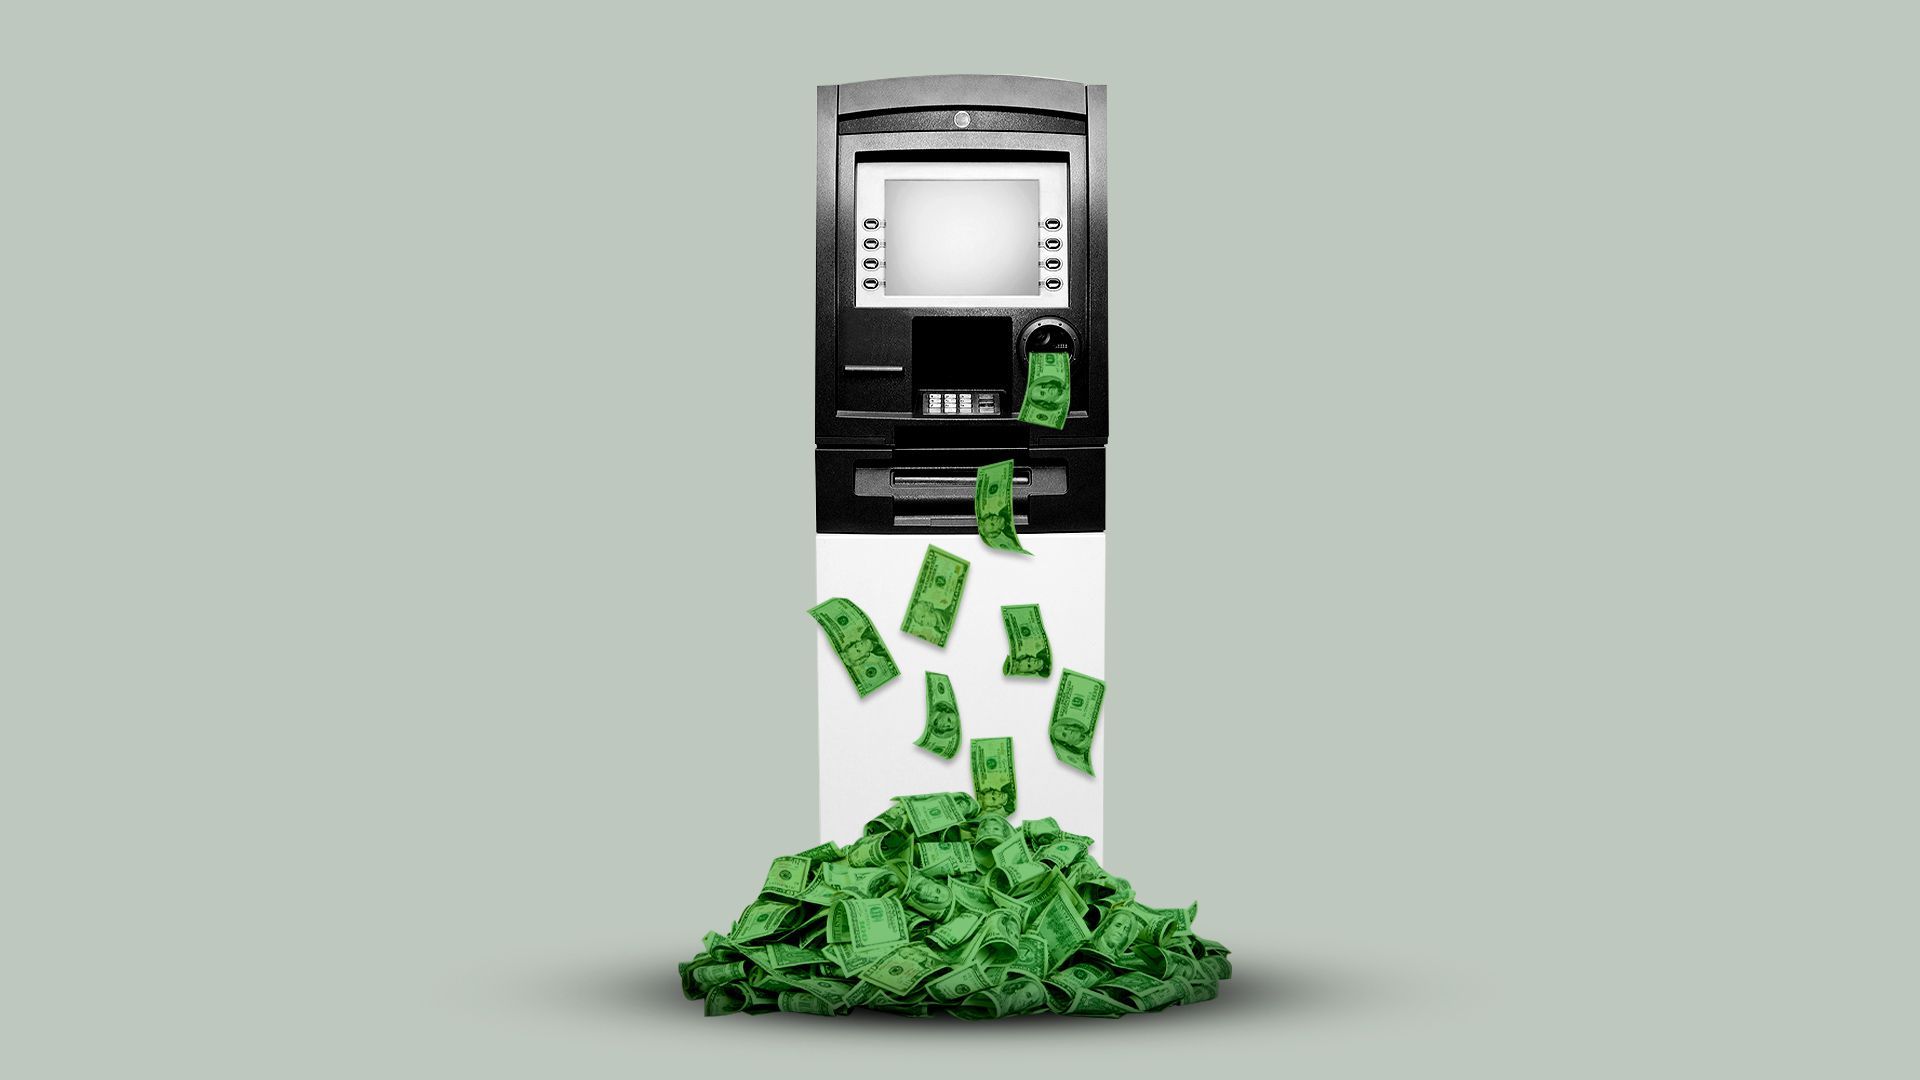 Illustration of an atm machine surrounded by a growing pile of money.  